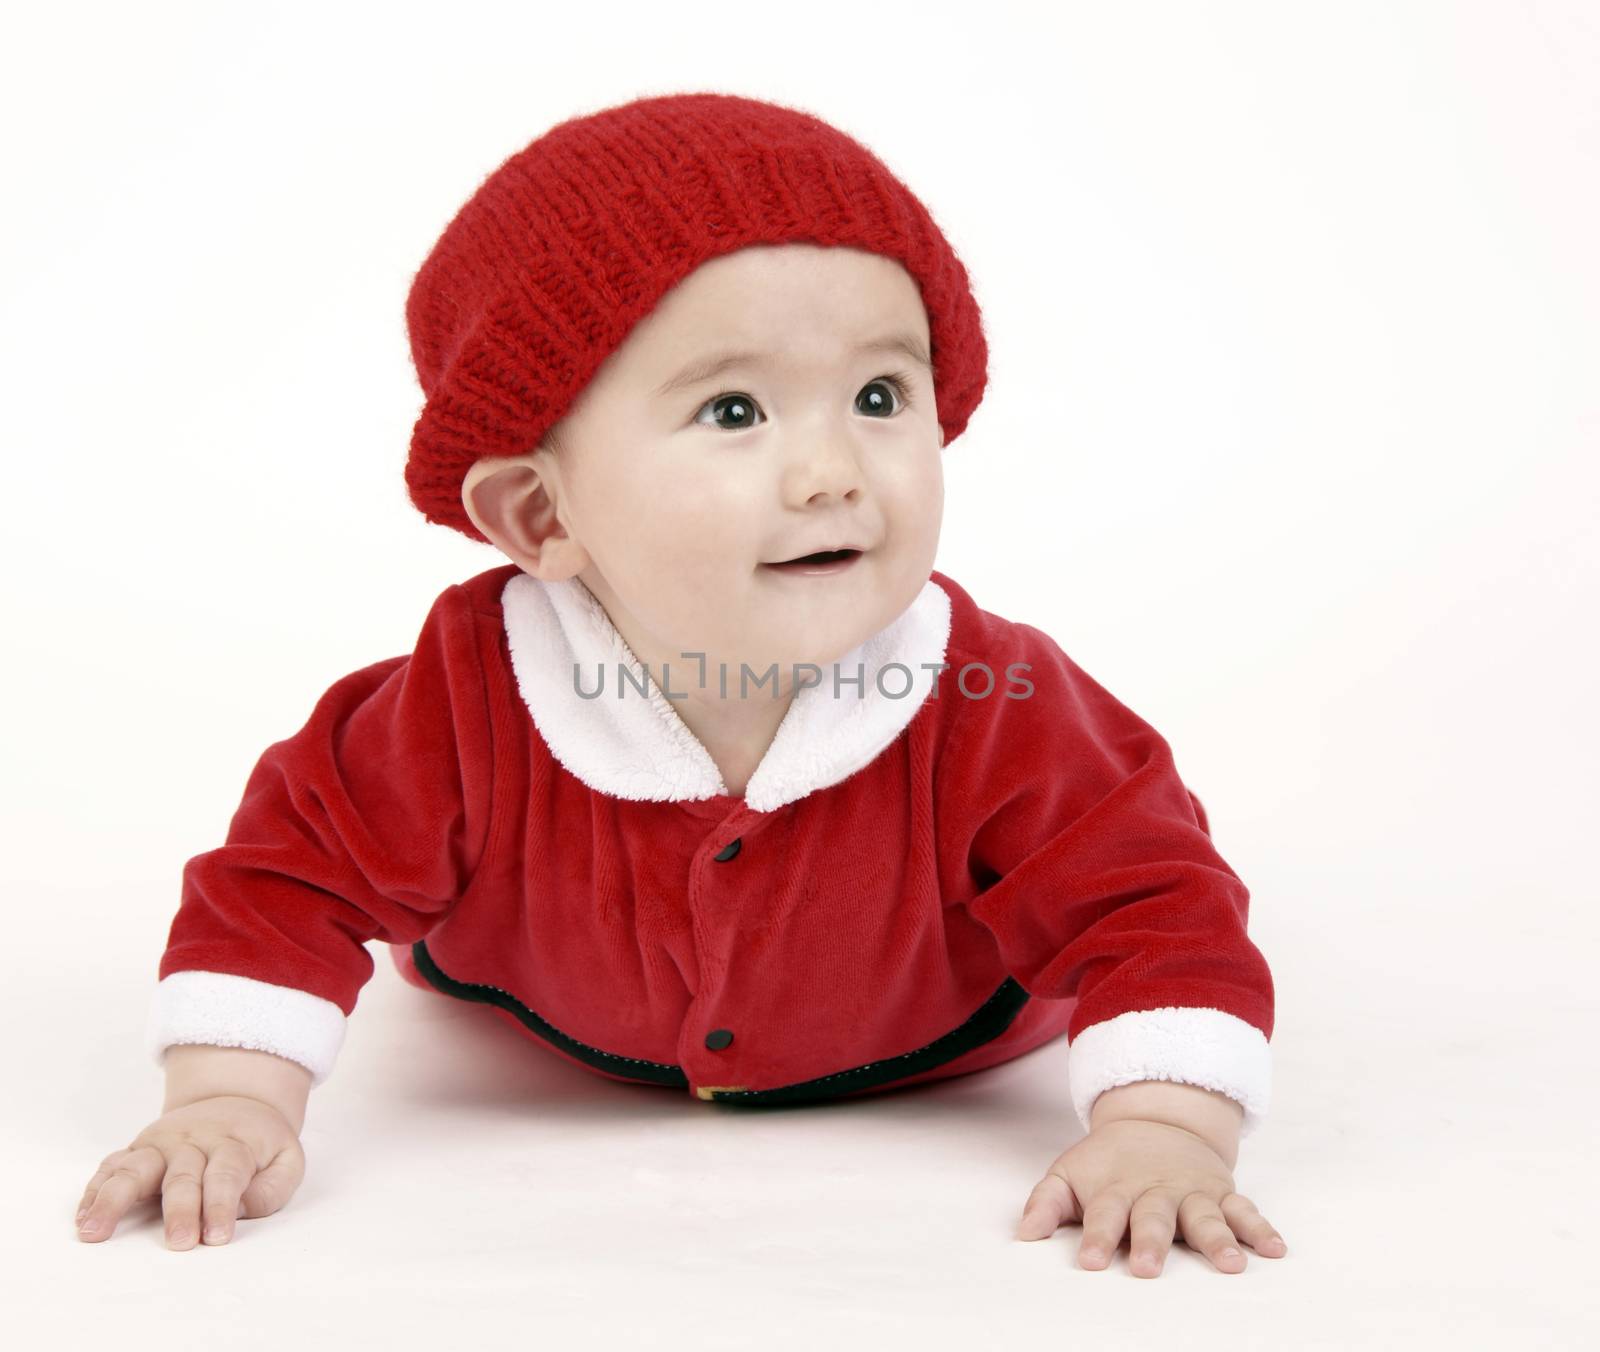 Cute Infant Boy in a horizontal composition crawling in red outfit and hat